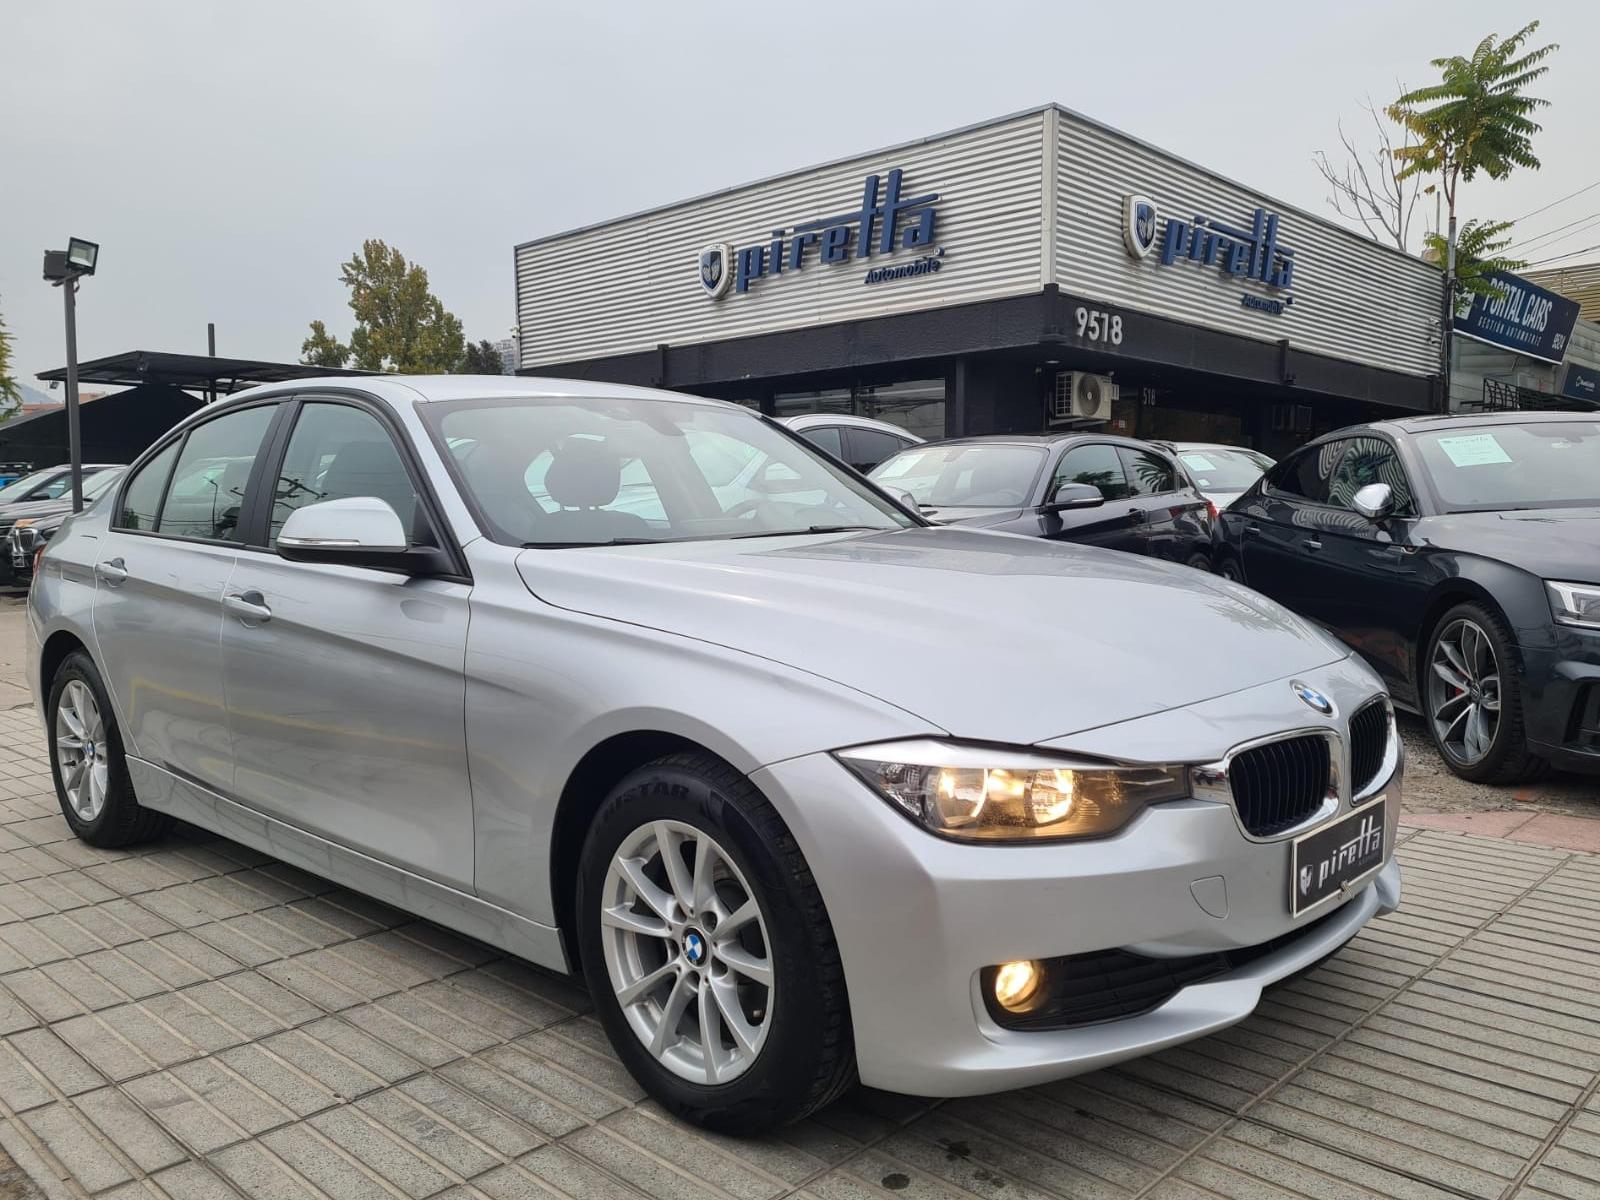 BMW 316I 1.6 AT 2014 IMPECABLE, SIN DETALLES - FULL MOTOR